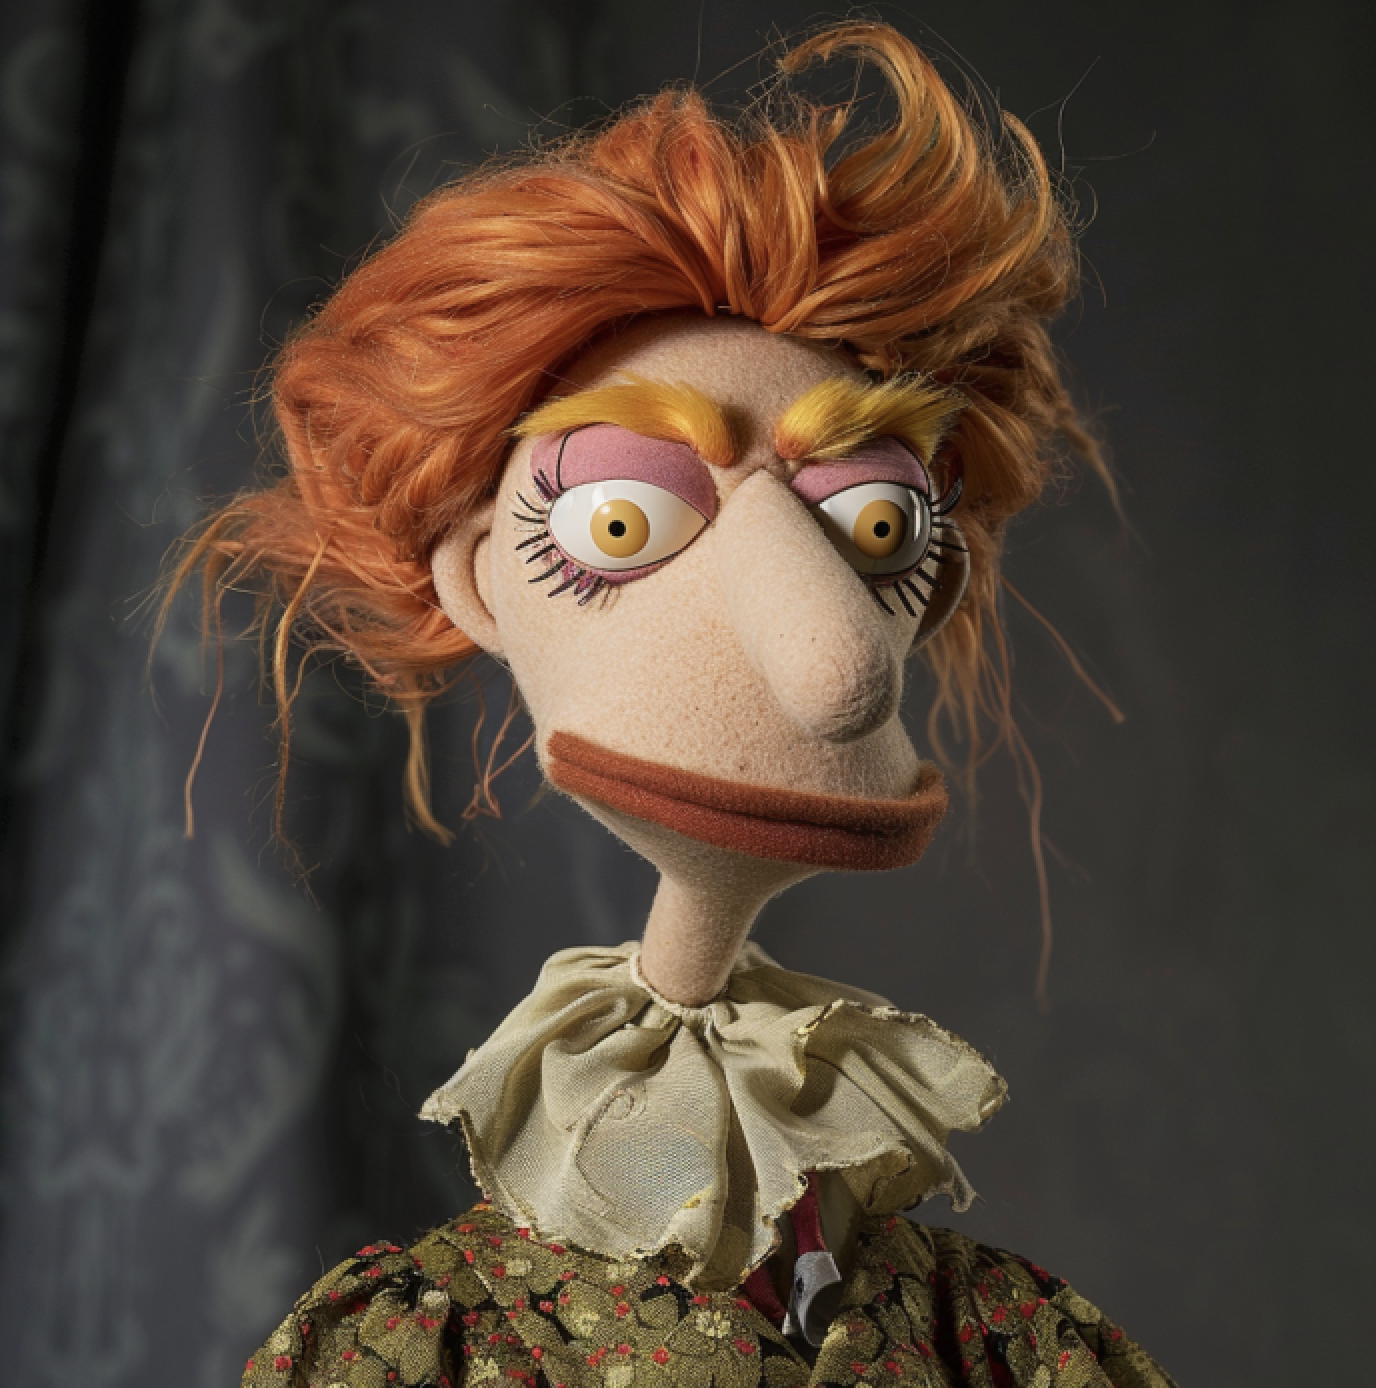 Muppet with wavy red hair, wide thin lips, ruffled collar, and patterned dress